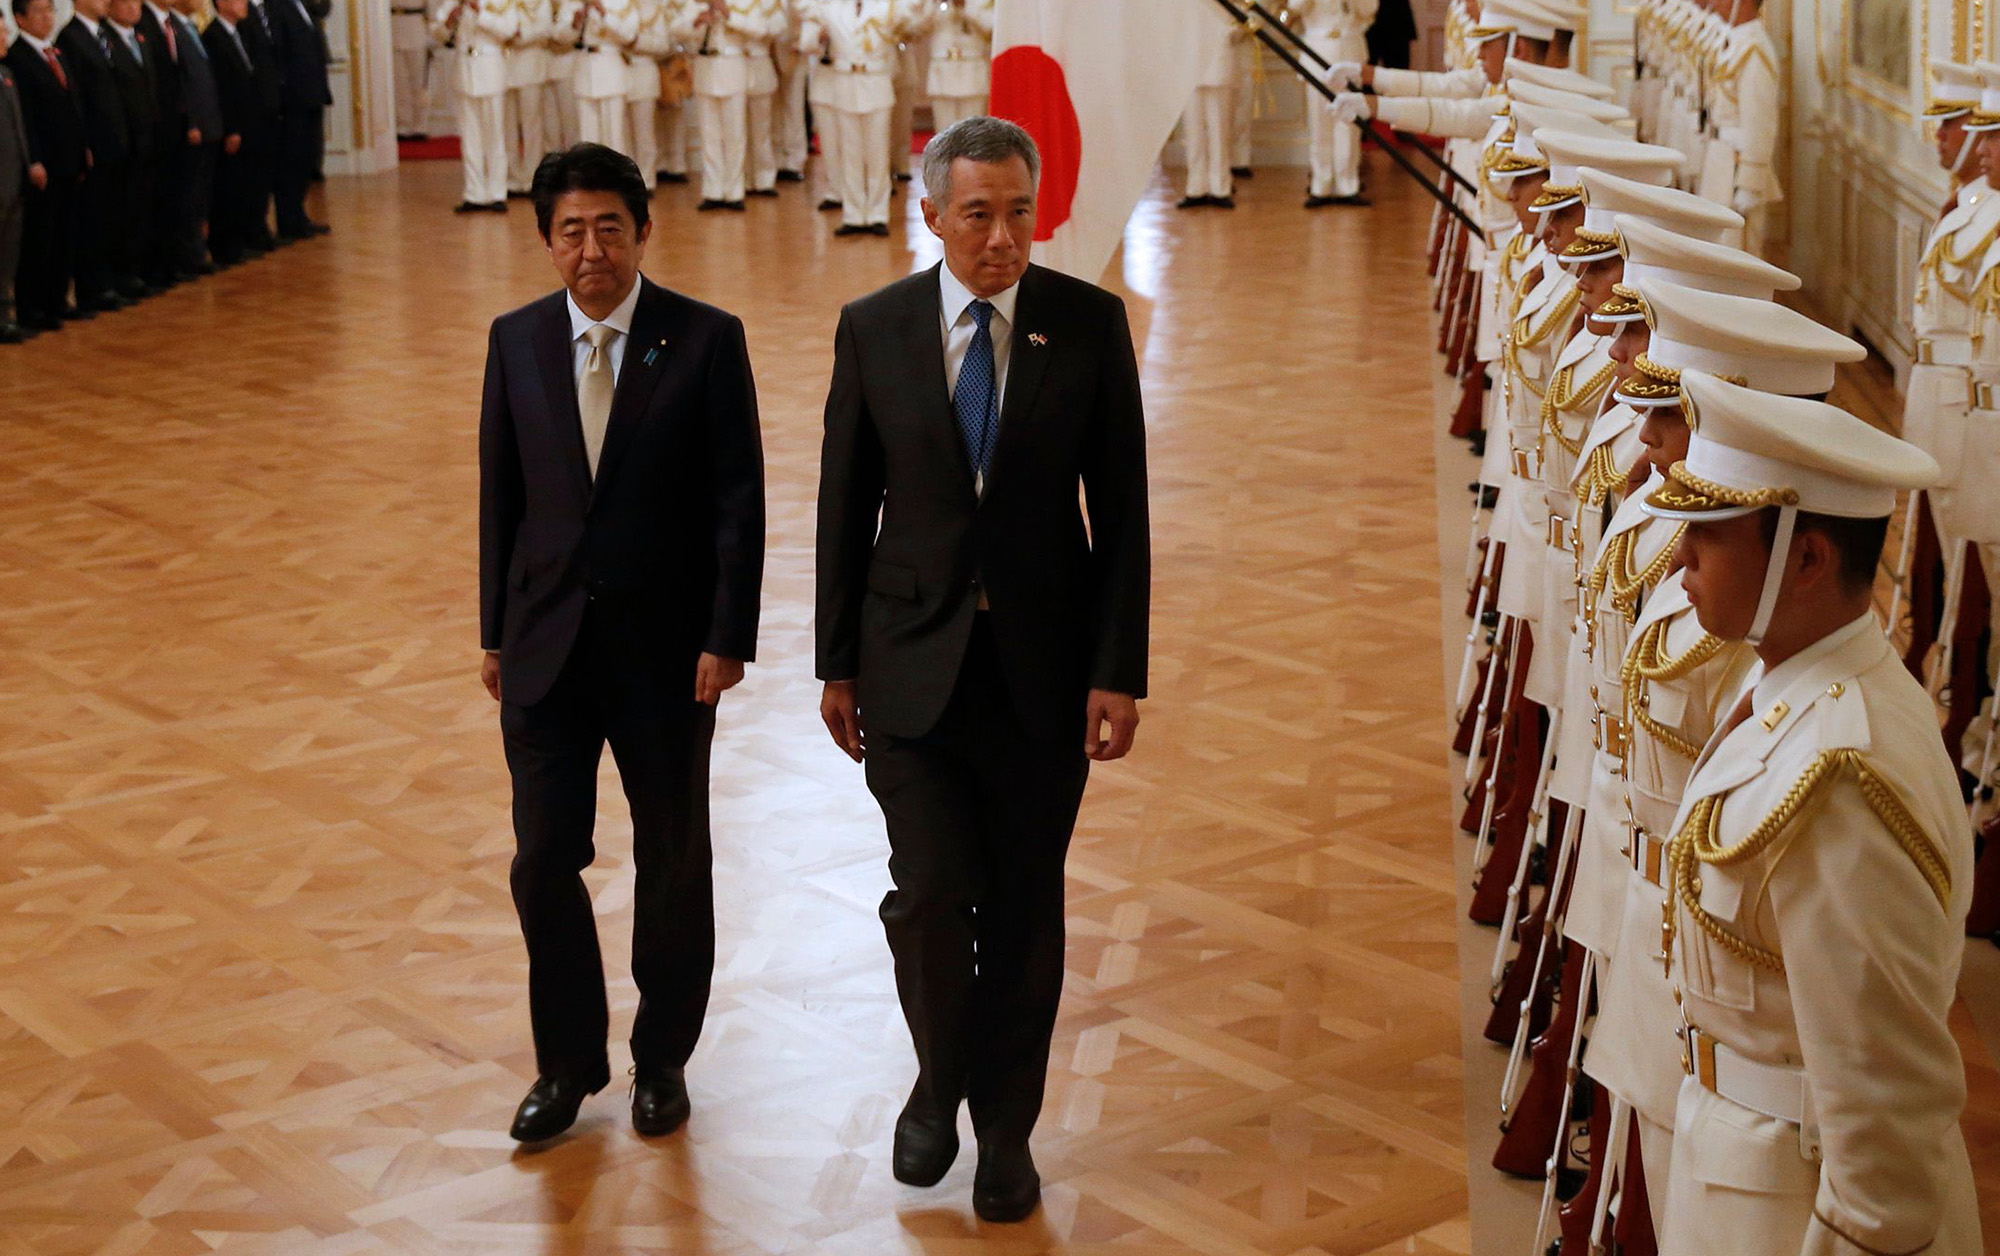 Japan's Prime Minister Shinzo Abe and Singapore's Prime Minister Lee Hsien Loong attend a welcoming ceremony hosted by Abe at the state guest house in Tokyo on September 28, 2016. 